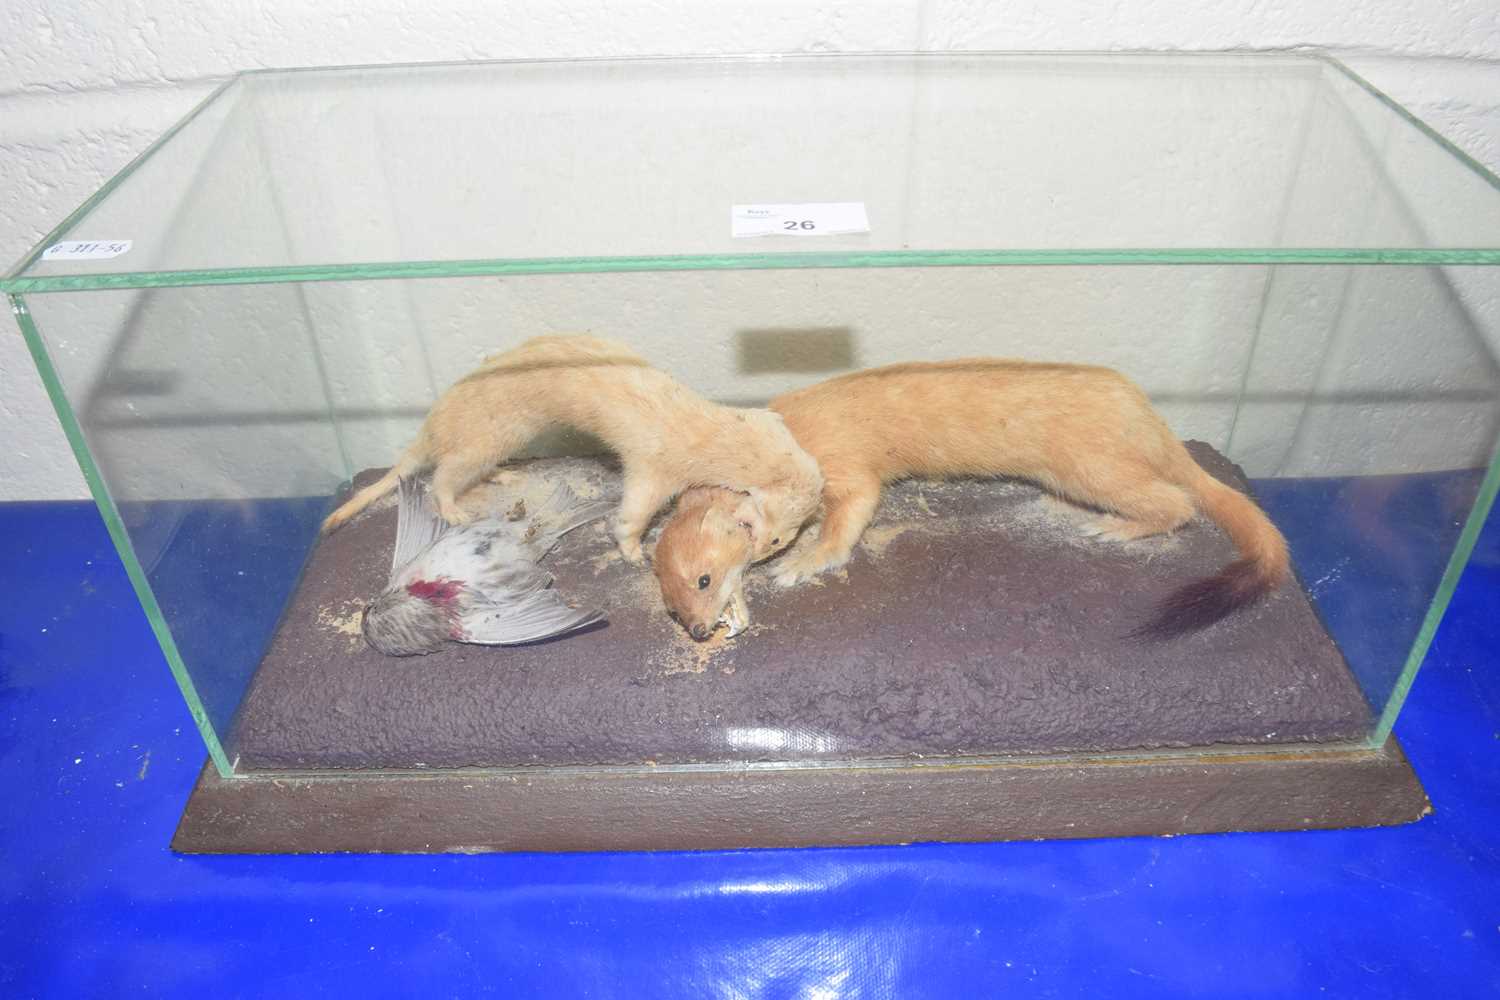 A taxidermy display of a stoat and a weasel fighting over a dead bird